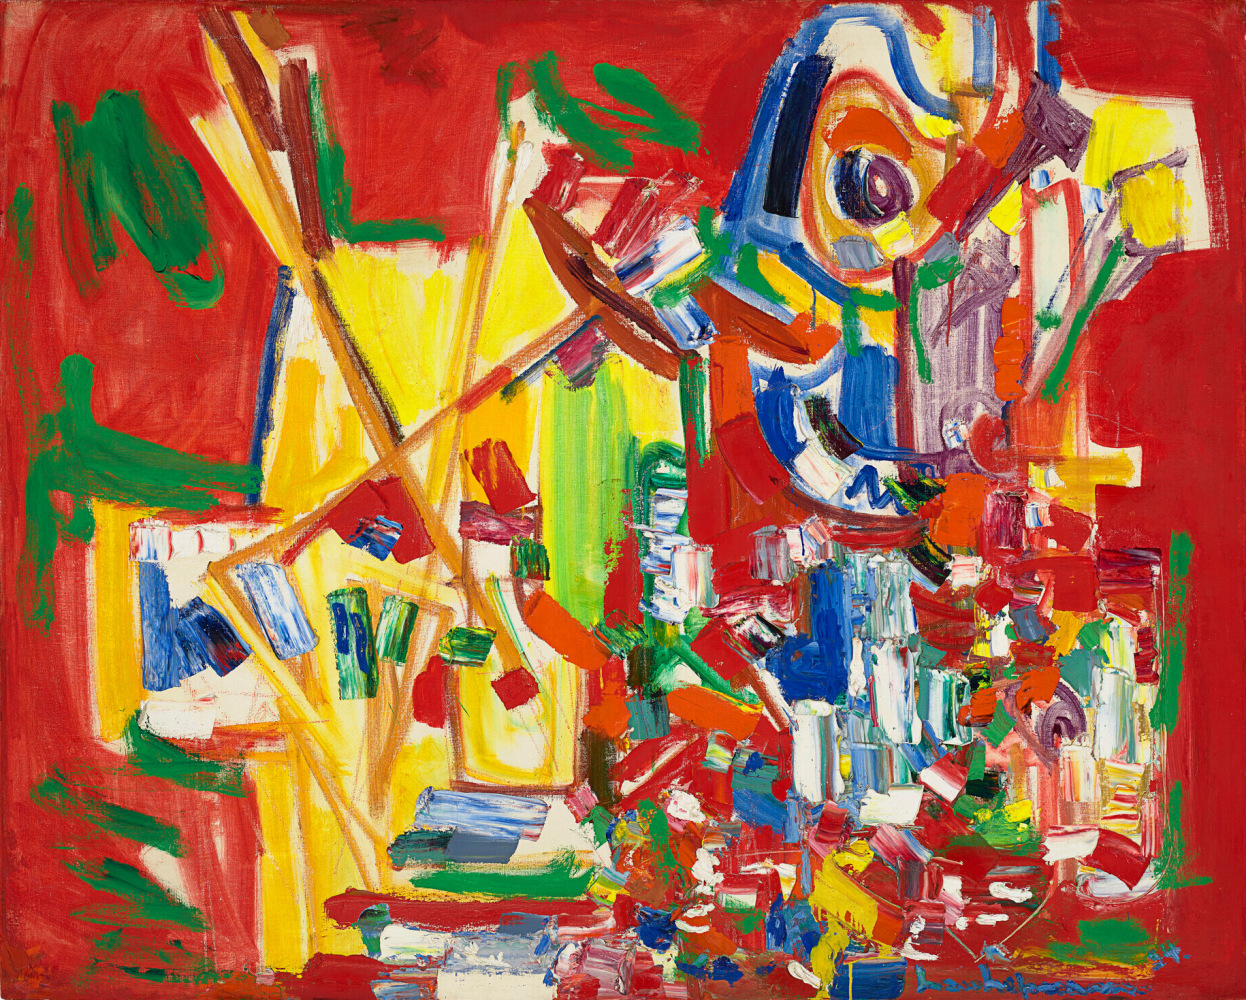 HANS HOFMANN (1880-1966)

Orchestral Dominance in Red

1954

Oil on canvas

48 x 60 inches

121.9 x 152.4cm